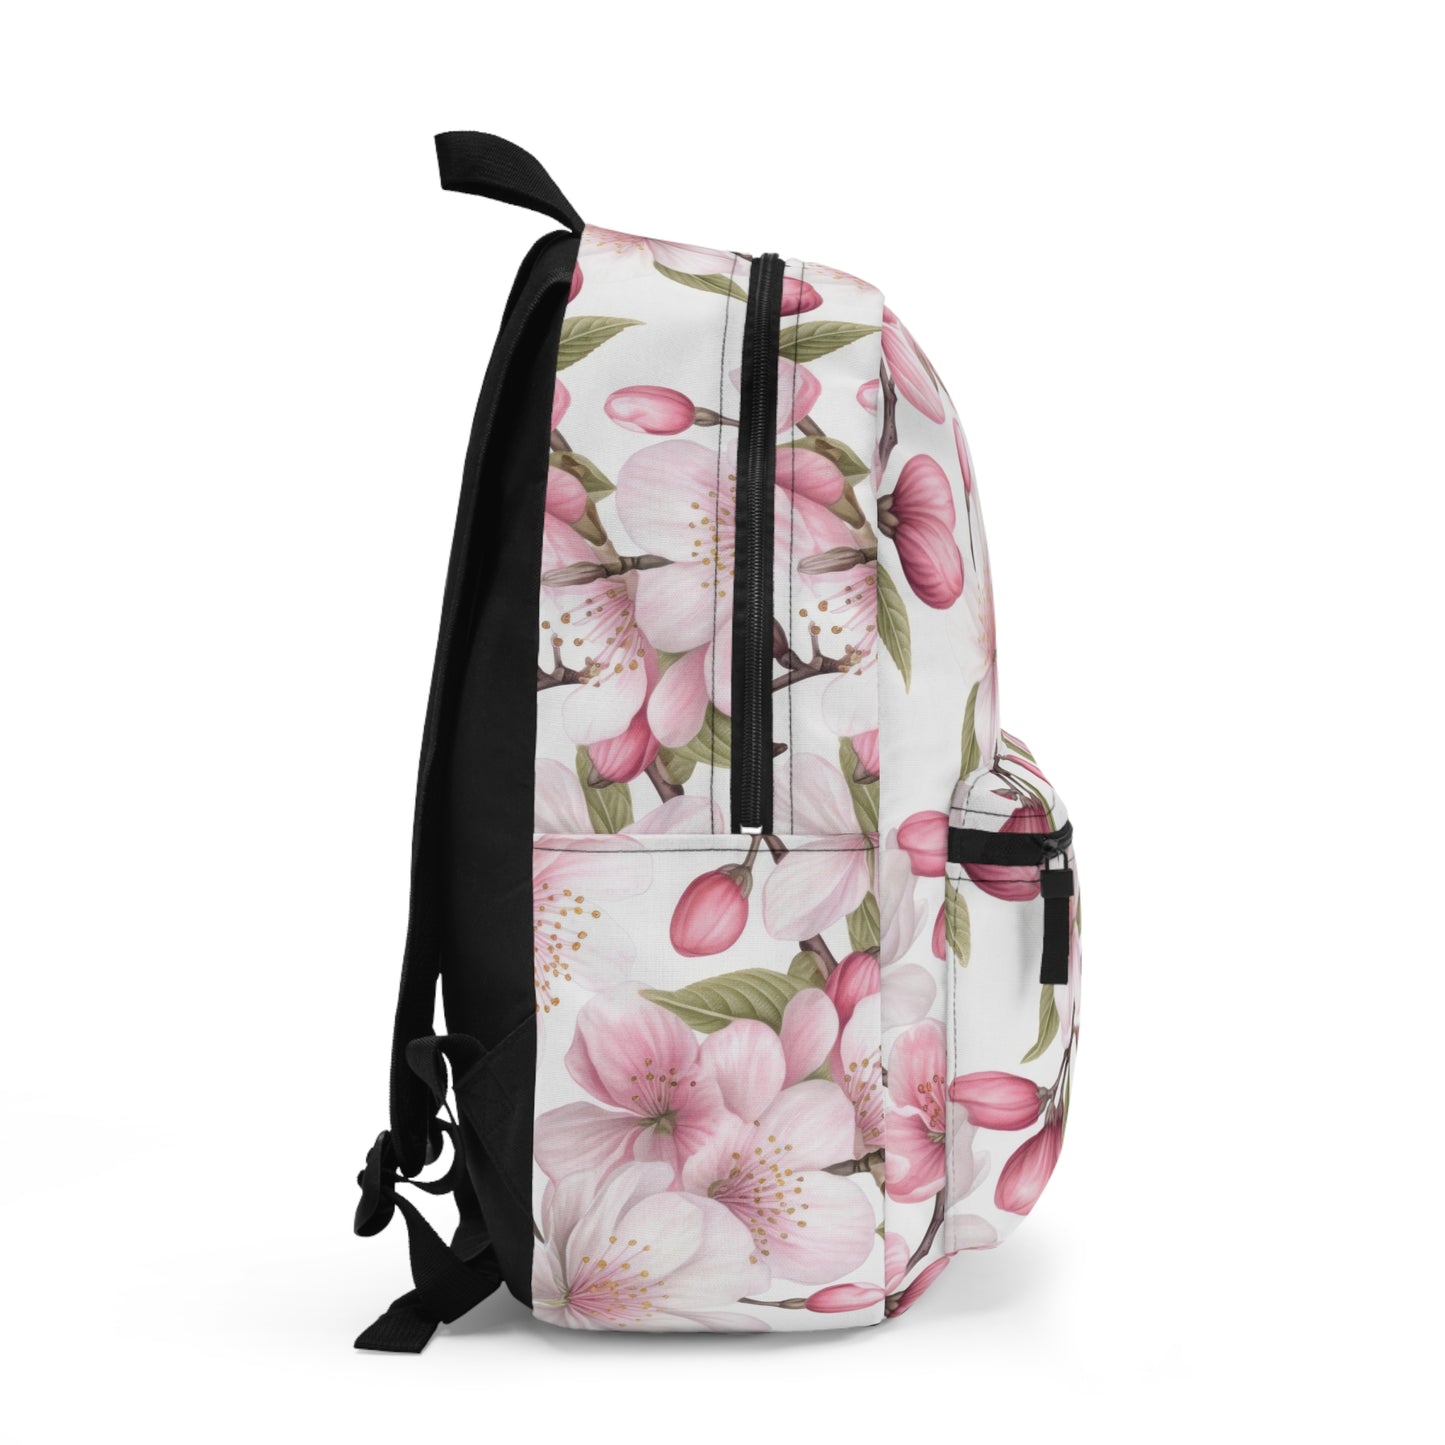 Cherry Blossoms Backpack